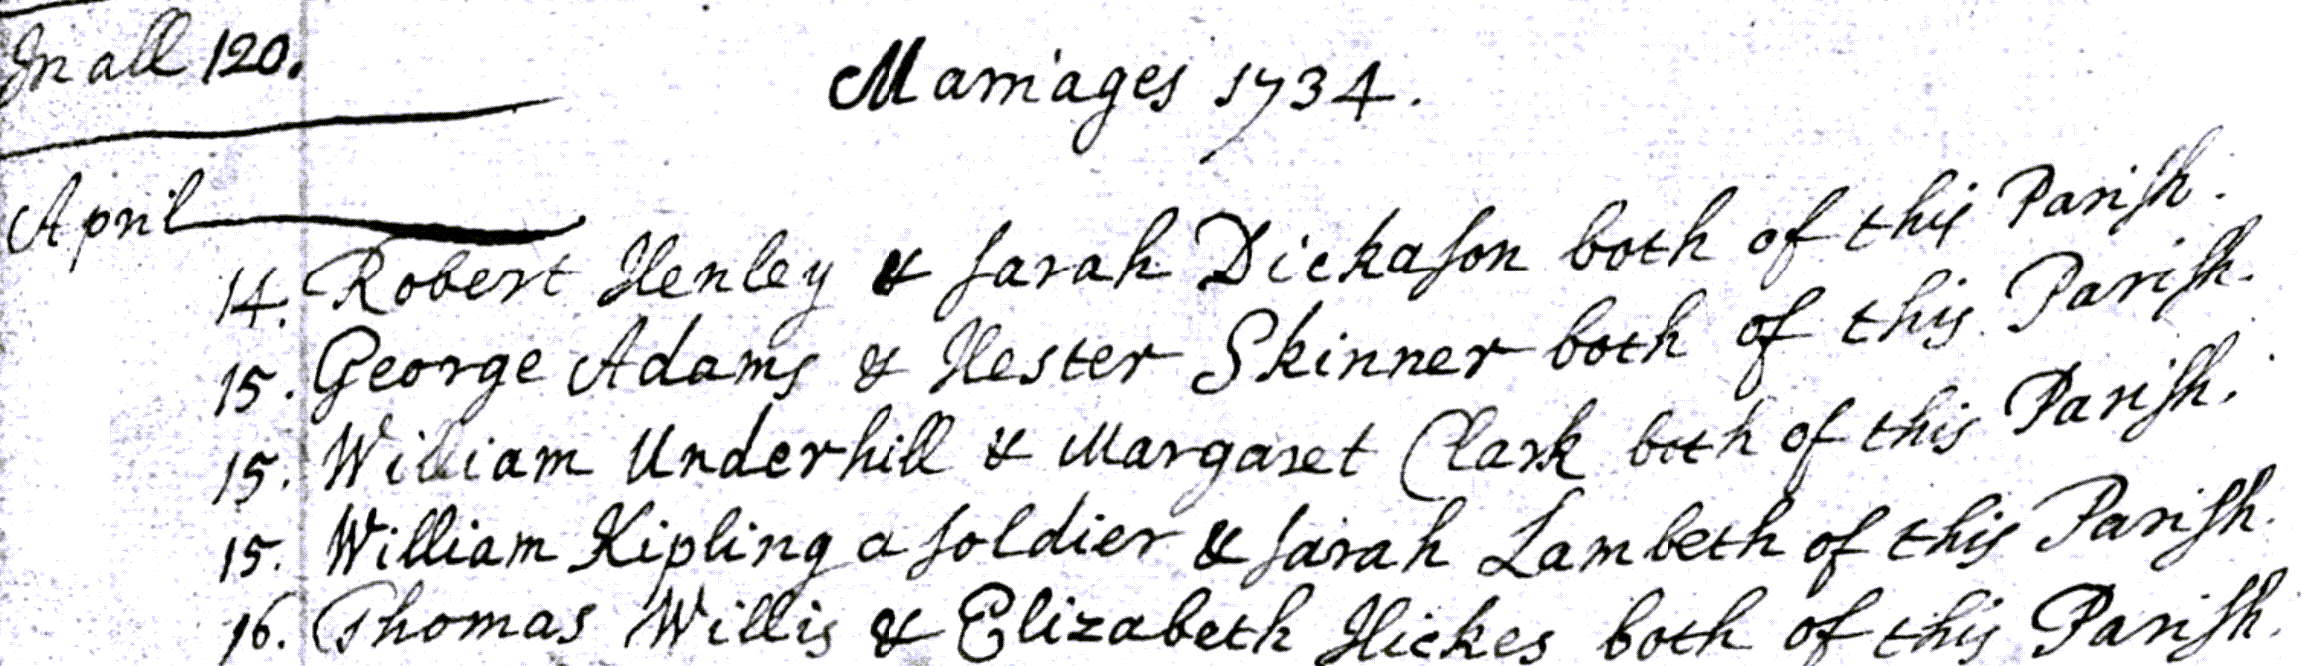 Figure 2: Marriage Register Entry for Thomas Willis and Elizabeth Hicks